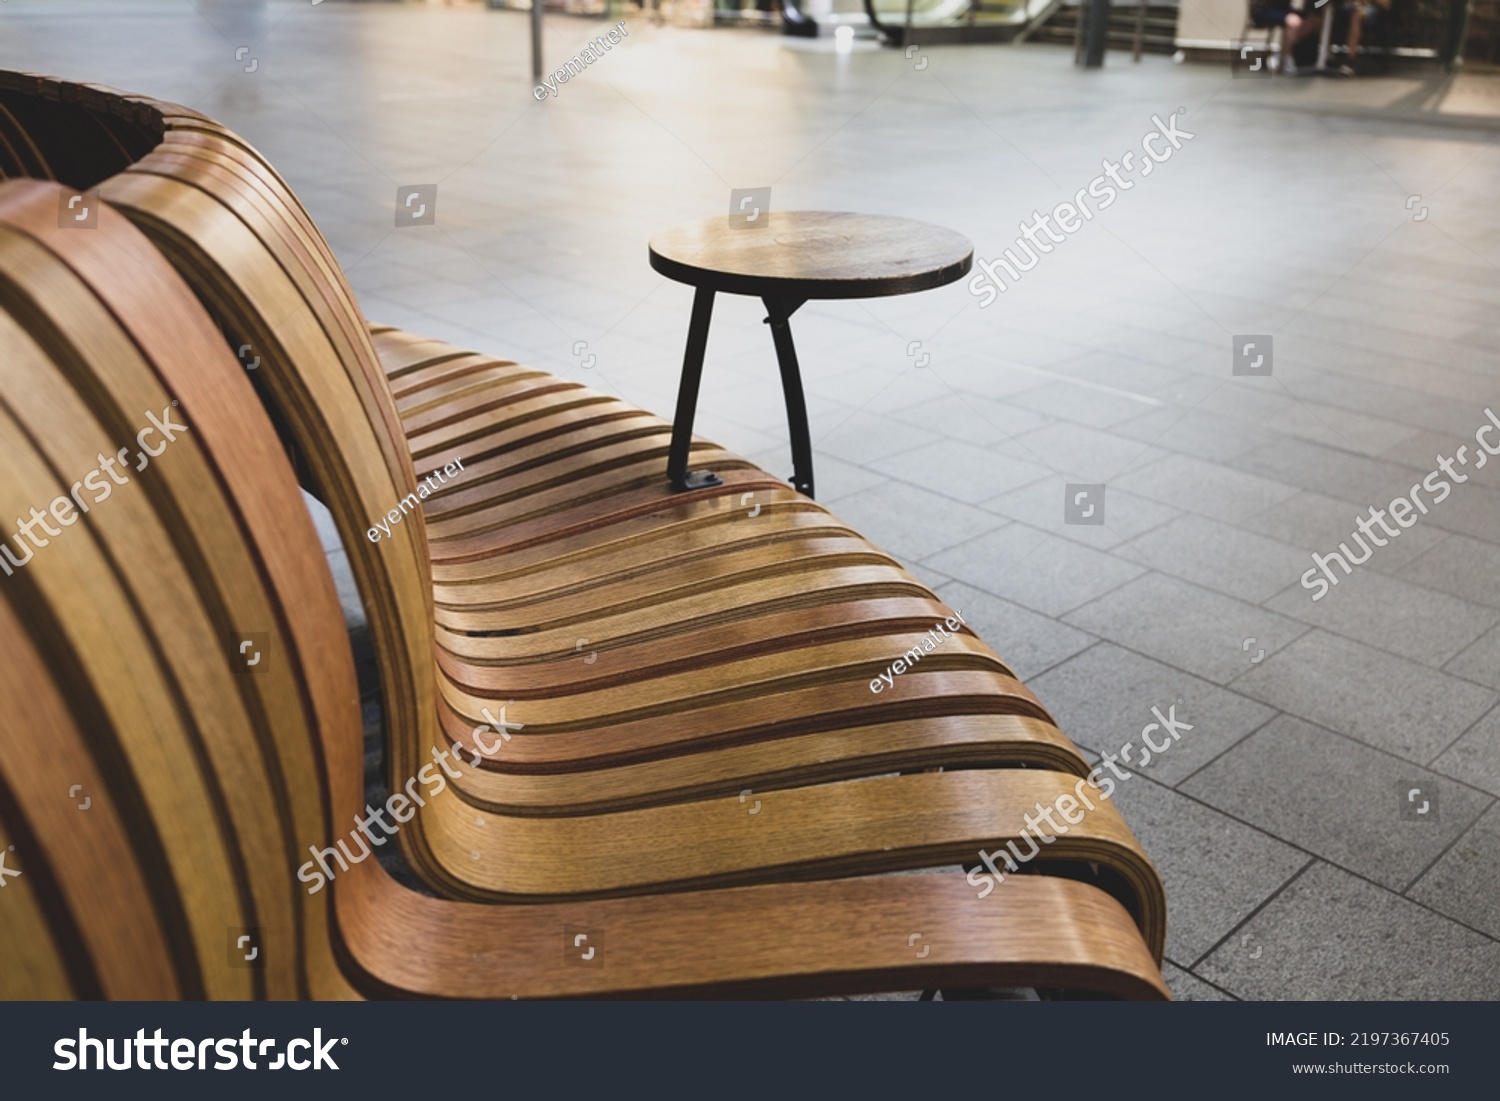 Elegant curved contemporary wooden seating area with built in table on a modern railway station concourse #2197367405